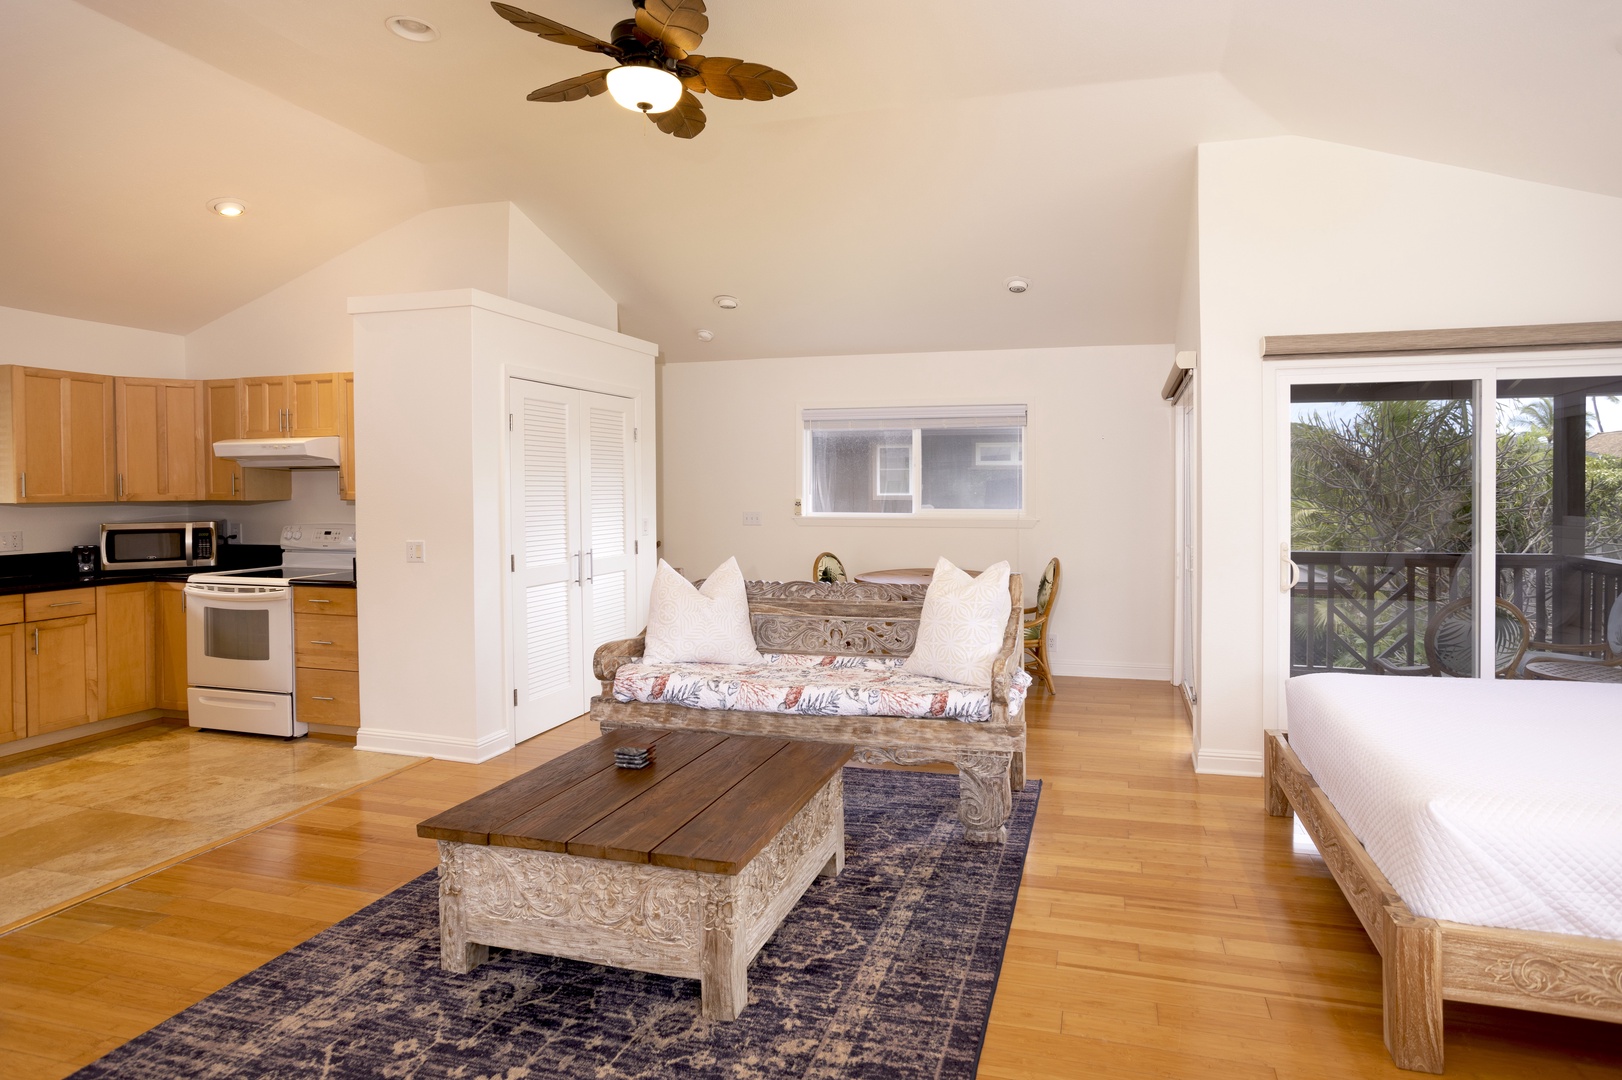 Kailua Vacation Rentals, Mokulua Seaside - The guest suite features a mini kitchen with ample appliances to prep delightful meals